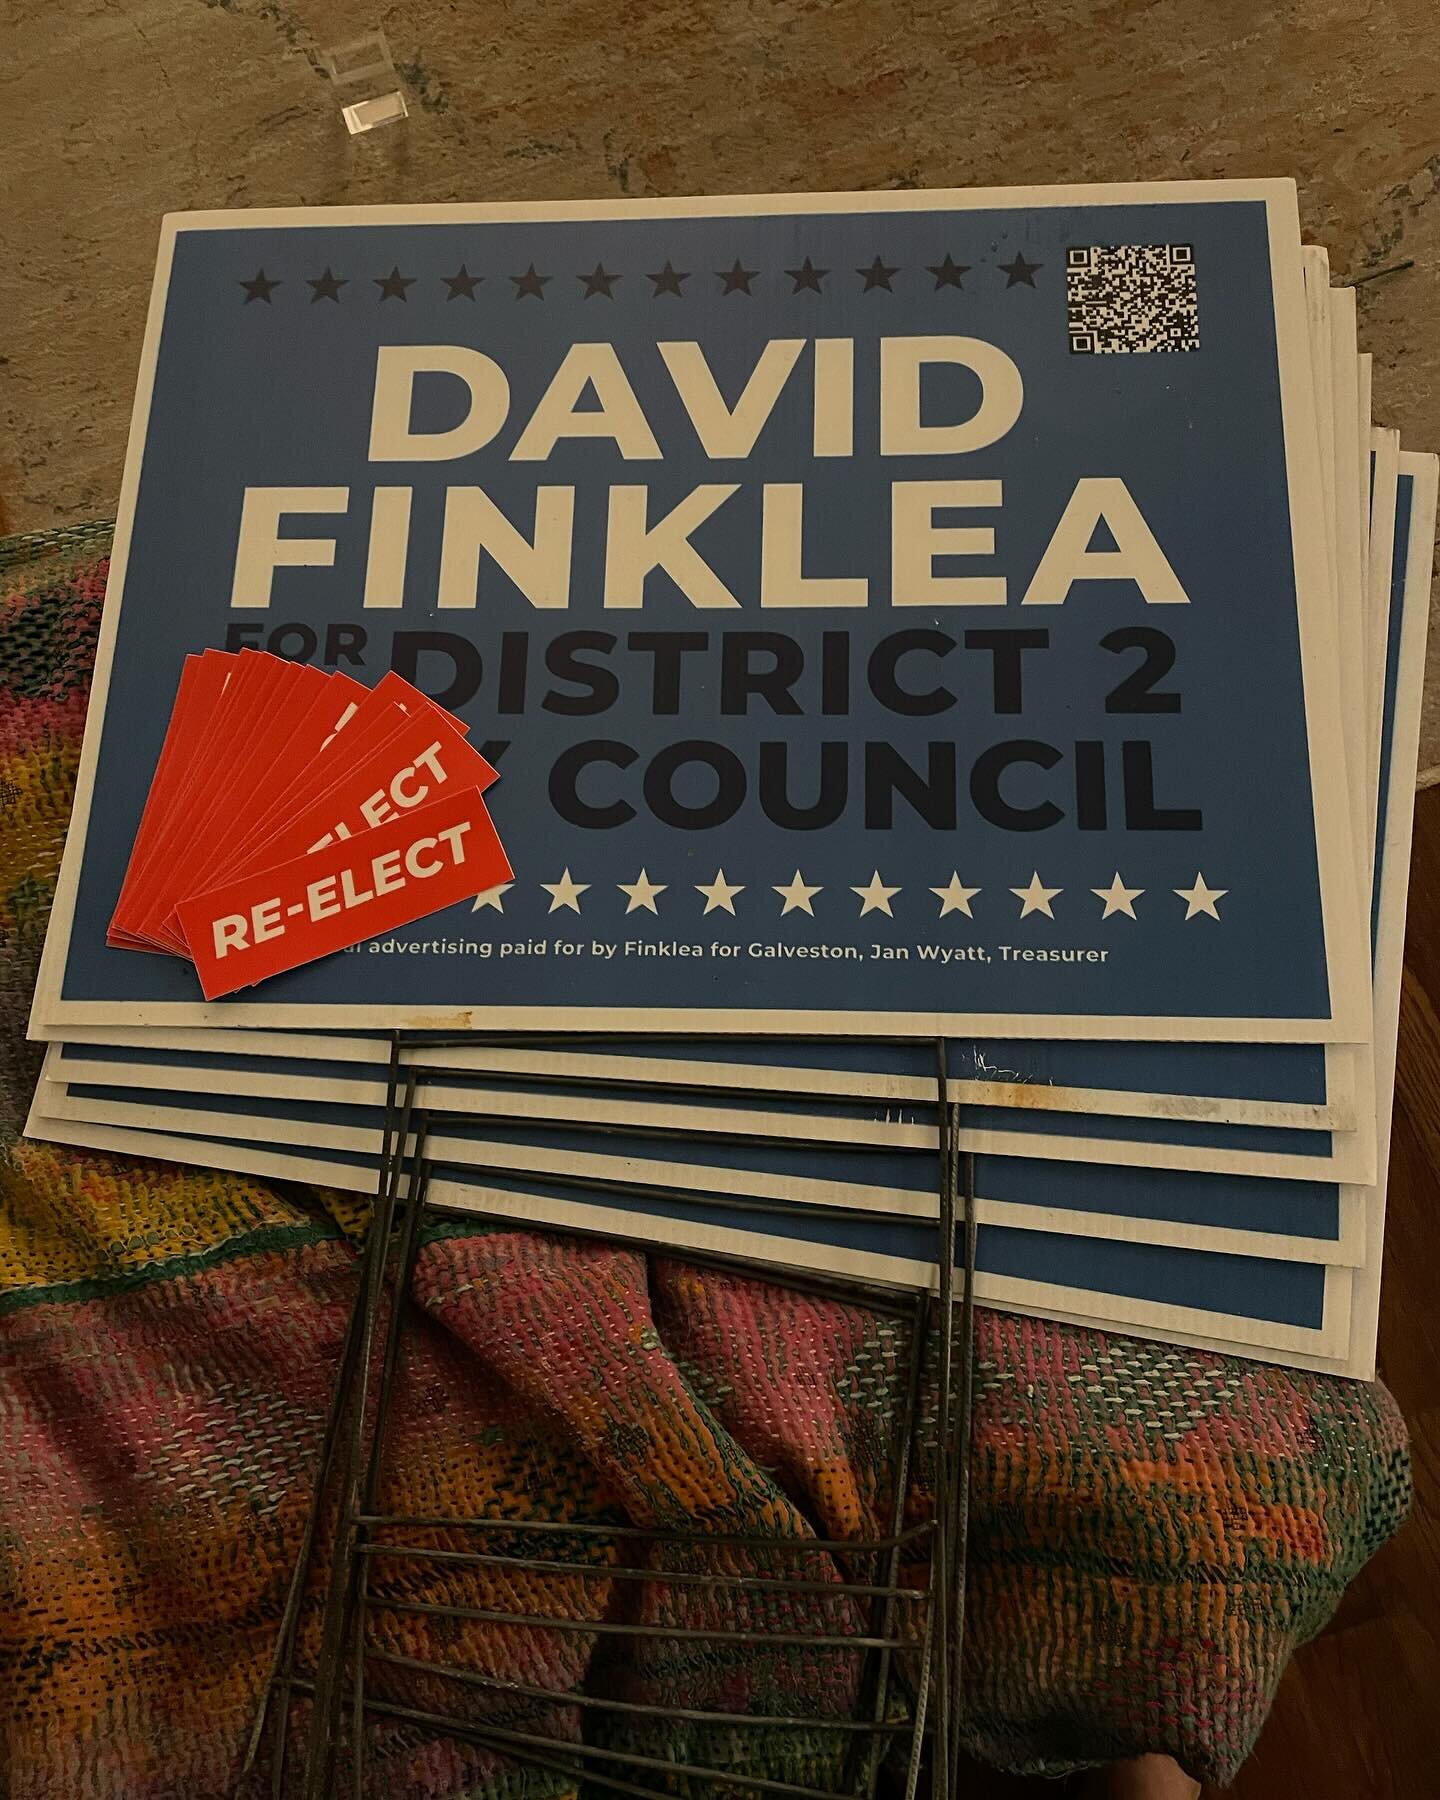 Recycling last years yard signs with a new RE-ELECT sticker! If you have your old one it&rsquo;s time to put it out!  New signs are available through the website www.finkleaforgalveston.com #finkleaforgalveston #finkleafordistrict2